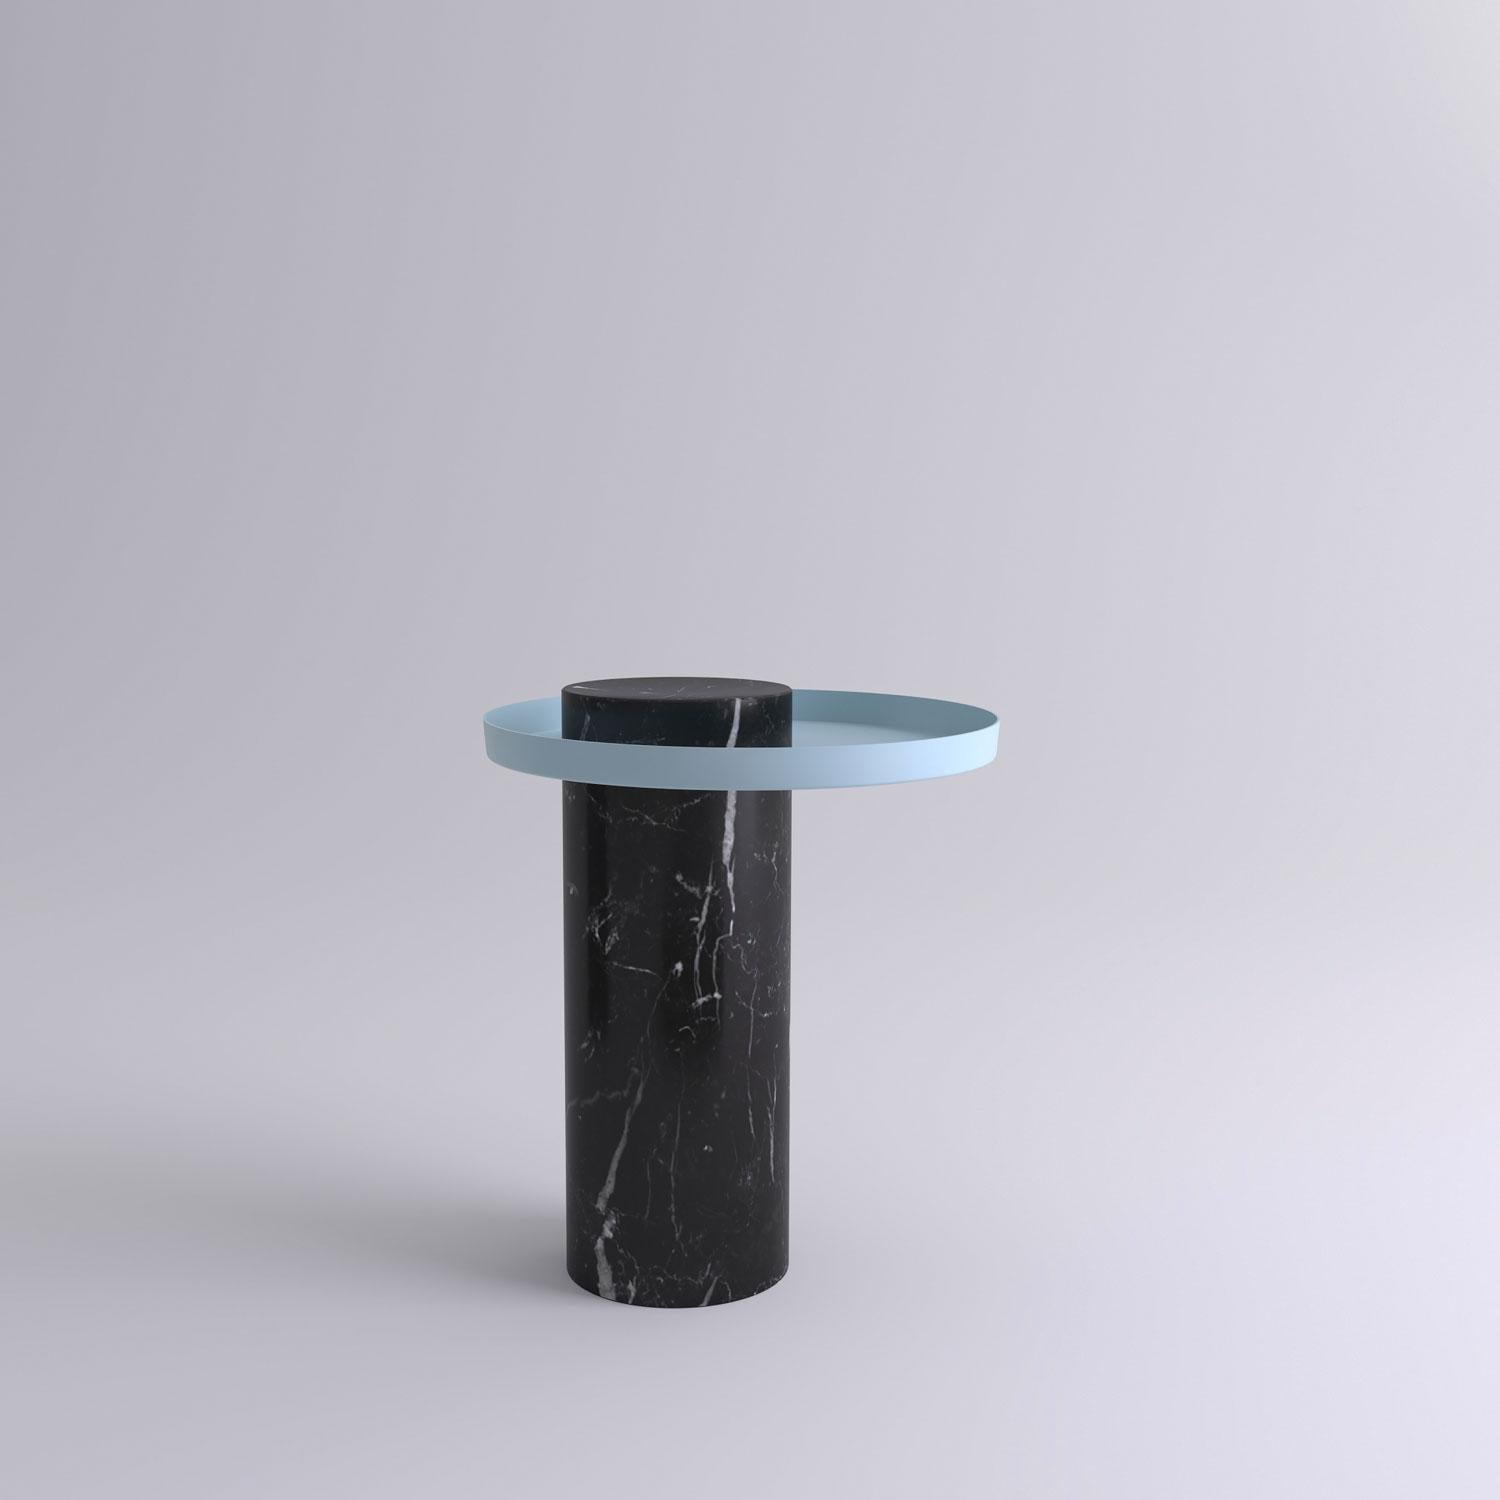 Medium black marquina contemporary guéridon, Sebastian Herkner
Dimensions: D 40 x H 46 cm
Materials: Black Marquina marble, light blue metal tray

The salute table exists in 3 sizes, 4 different marble stones for the column and 5 different